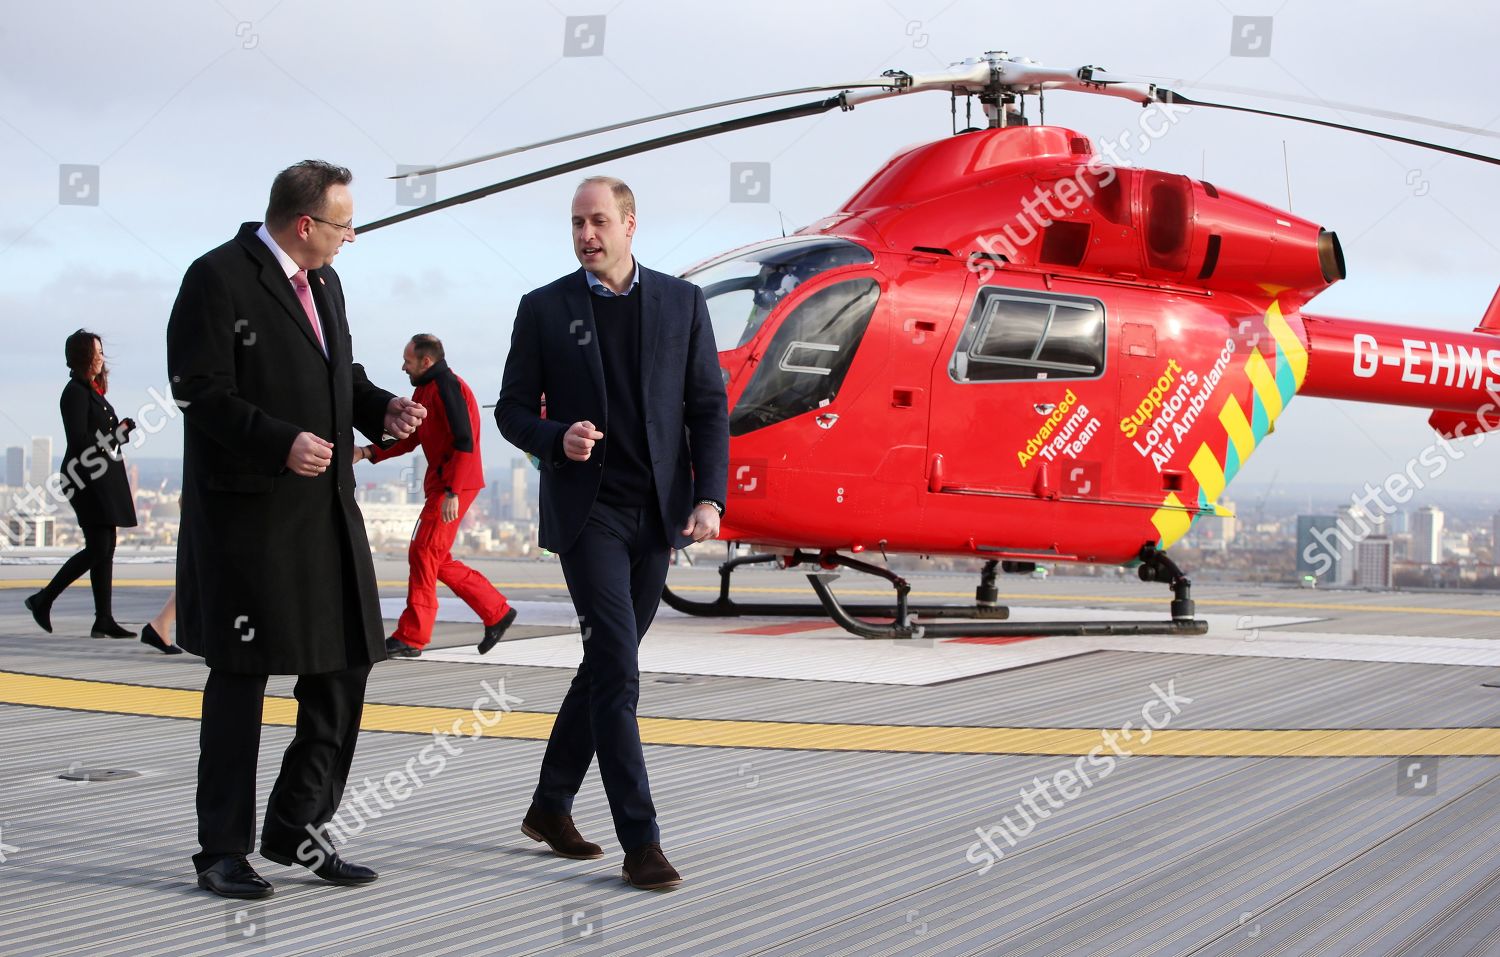 prince-william-arrives-at-the-royal-london-hospital-aboard-an-air-ambulance-uk-shutterstock-editorial-10052351h.jpg